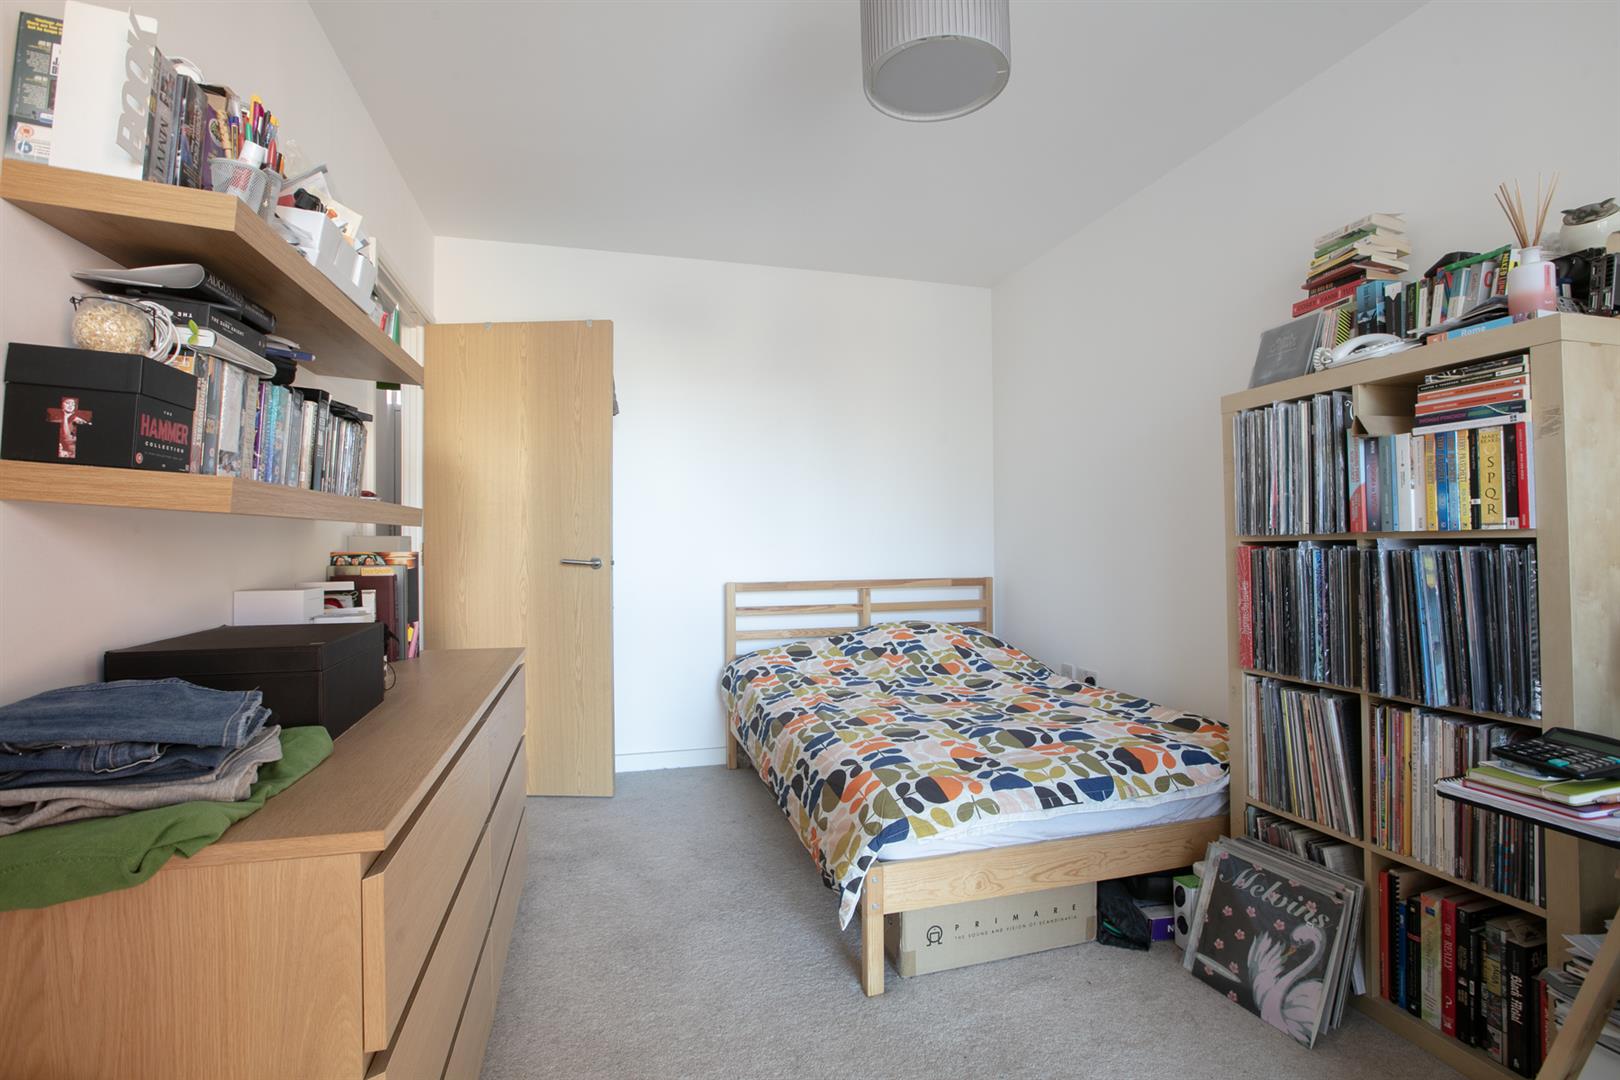 Flat/Apartment For Sale in Edmund Street, Camberwell, SE5 1176 view11